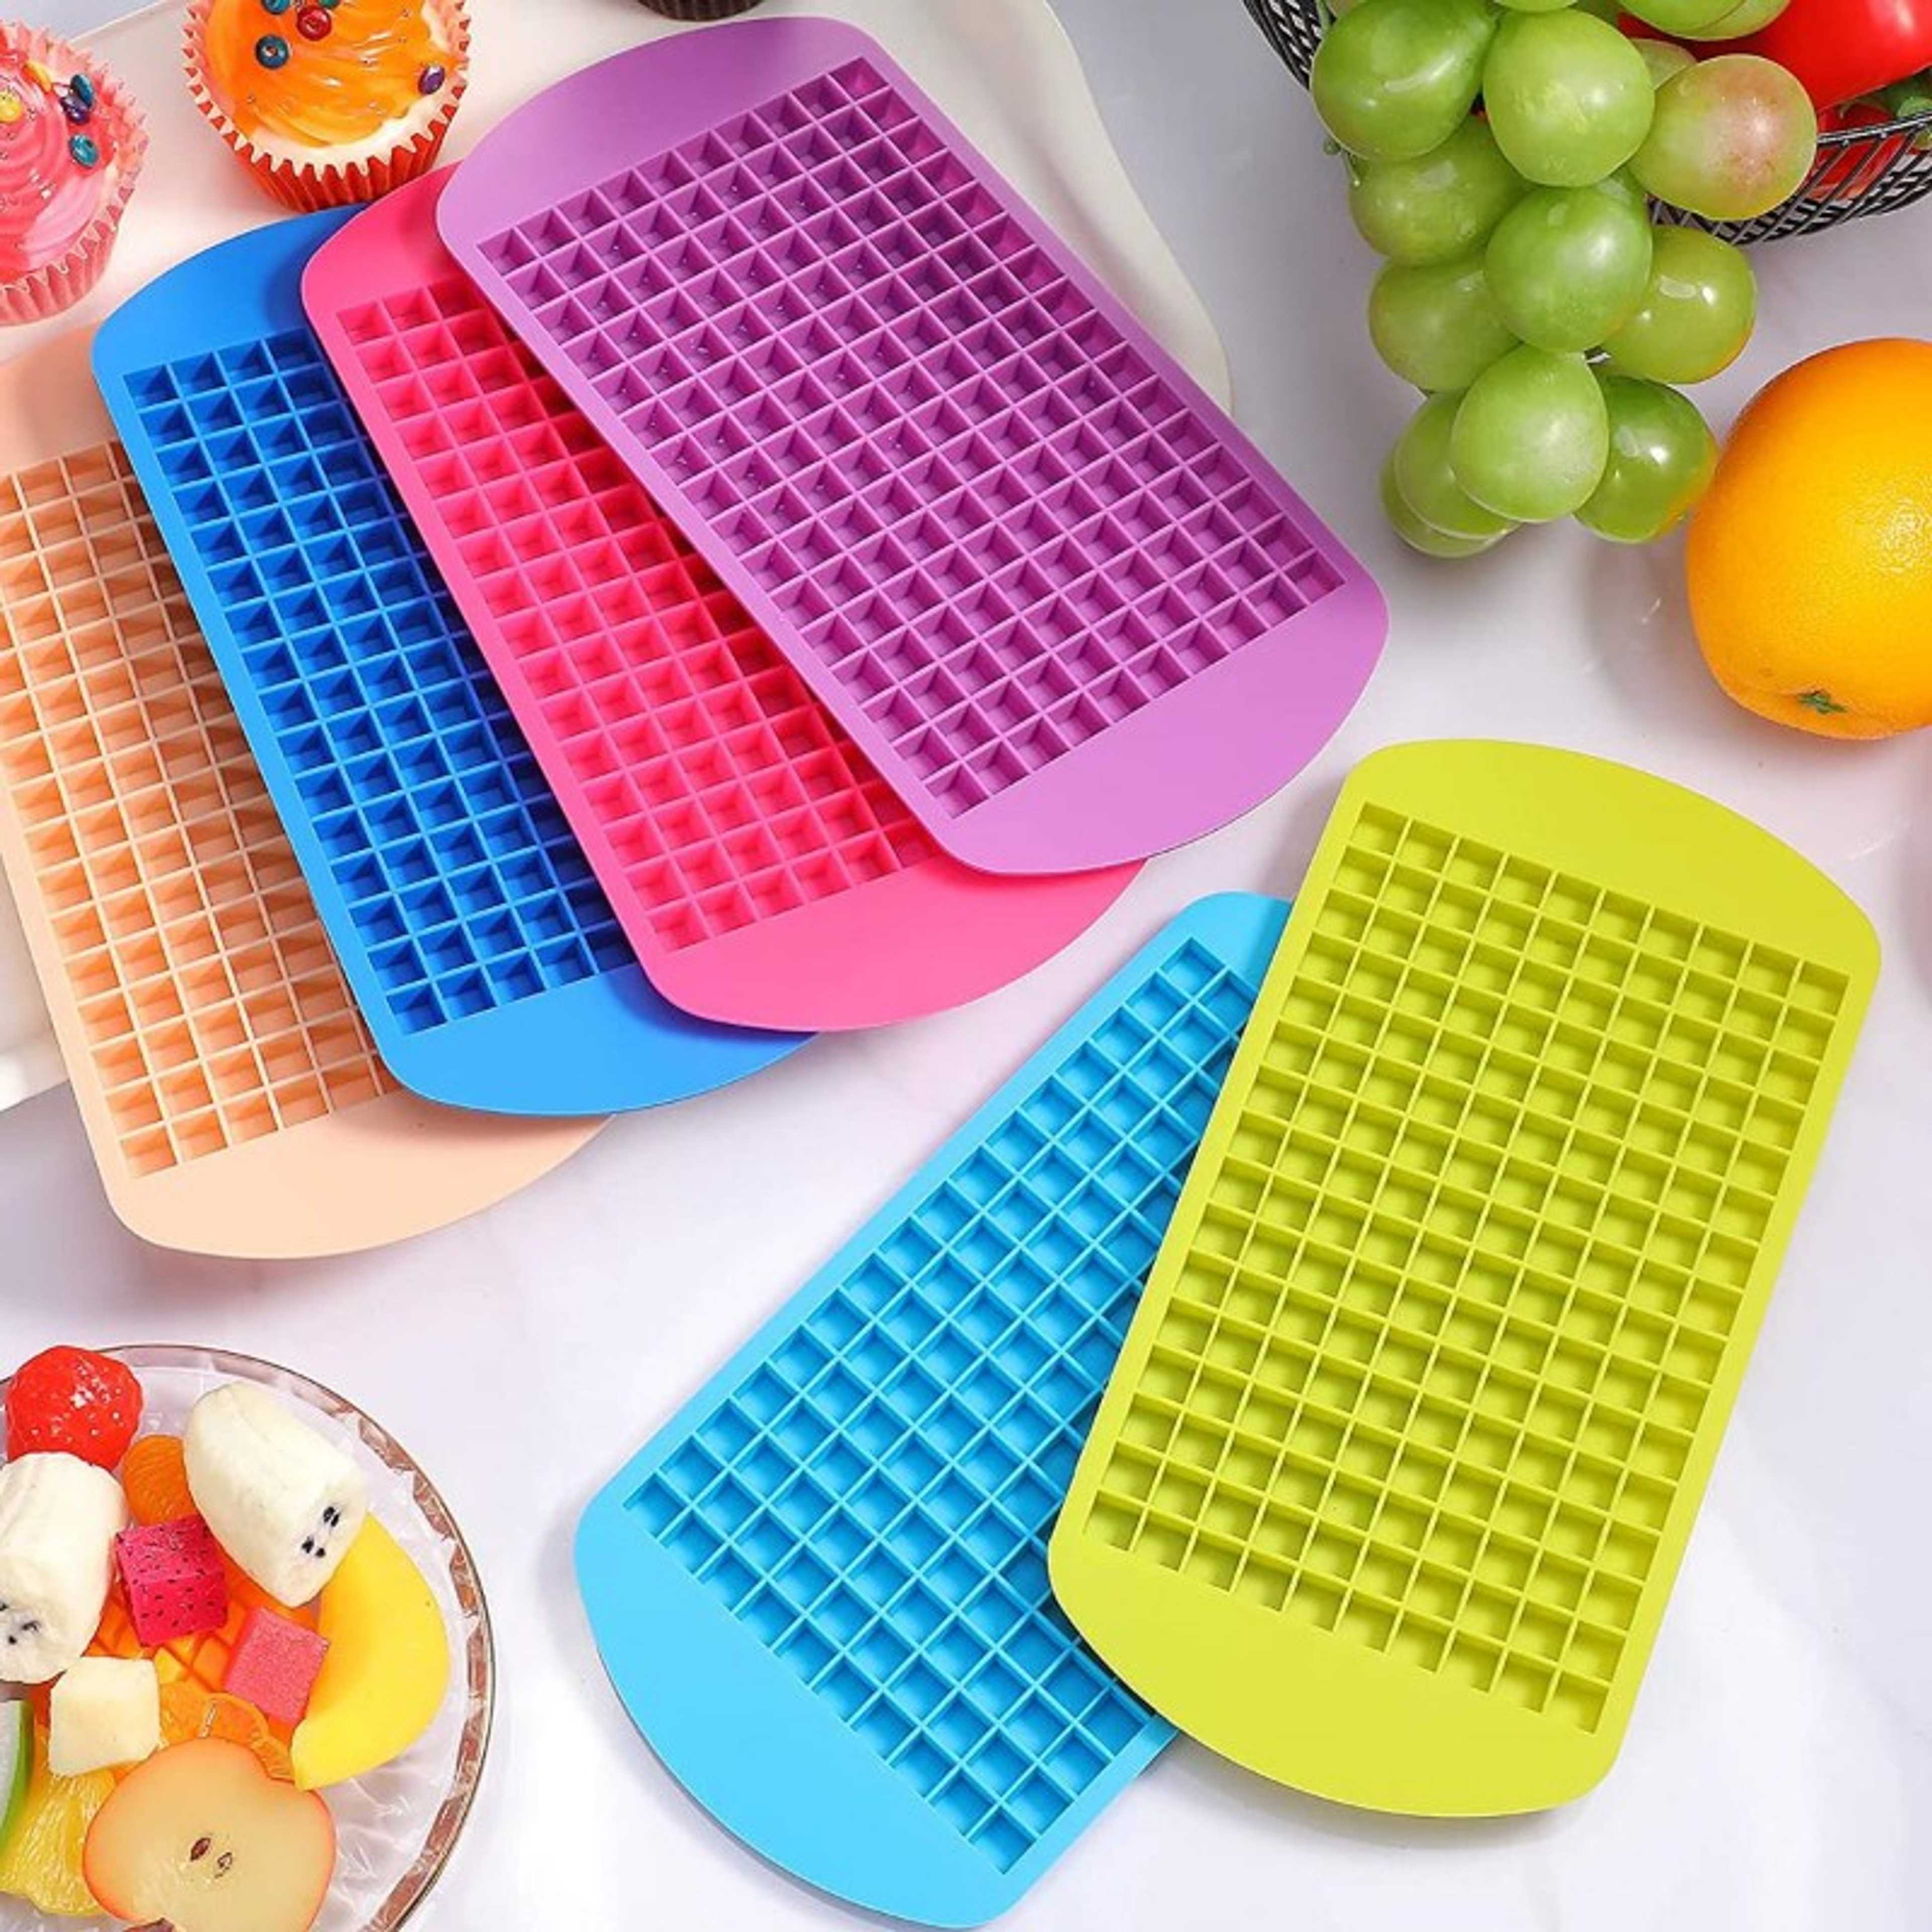 24x12x1cm 160 Grids Silicone Ice Cubes Frozen Mini Food Grade Ice Tray Fruit Maker Bar Party Pudding Tool Kitchen Accessories Silicone Mold ice